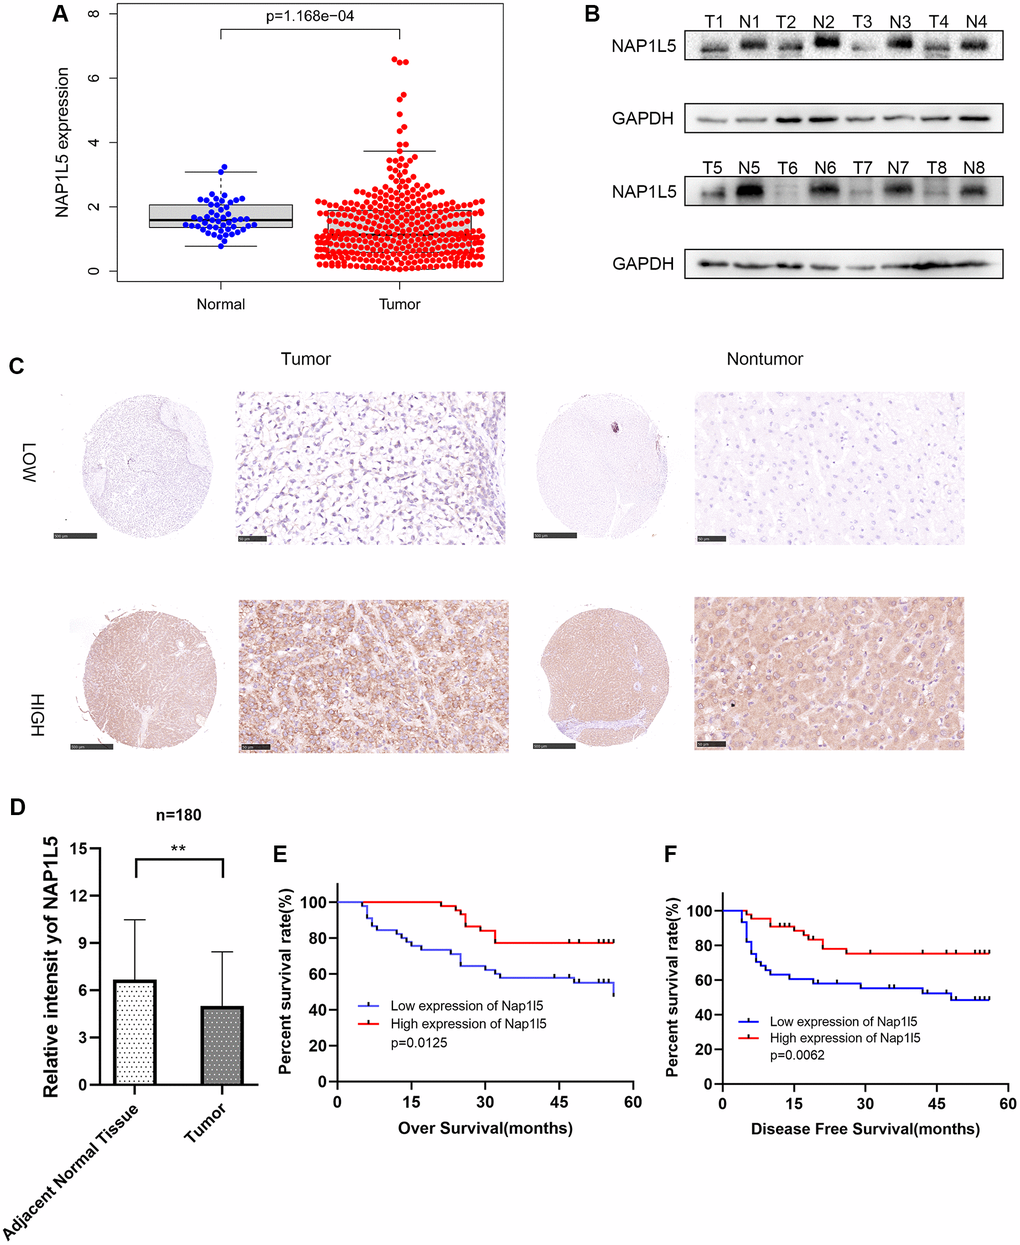 The expression of NAP1L5 in hepatocellular carcinoma is decreased and is related to poor prognosis. (A) The expression of the NAP1L5 gene in the TCGA database: 50 paracancerous tissues and 374 cancerous tissues. (B) The expression of NAP1L5 protein in 8 pairs of hepatocellular carcinoma (Tumor) and paracancerous tissues (Normal) was assessed. (C) Immunohistochemistry was used to detect the expression of NAP1L5 in the HCC tissue microarray. (D) The immunohistochemical score of 90 samples of HCC and paracancerous tissues in the tissue microarray. (E, F) Kaplan–Meier survival analysis was performed to evaluate the effect of NAP1L5 on disease-free survival and overall survival. *p **p ***p 